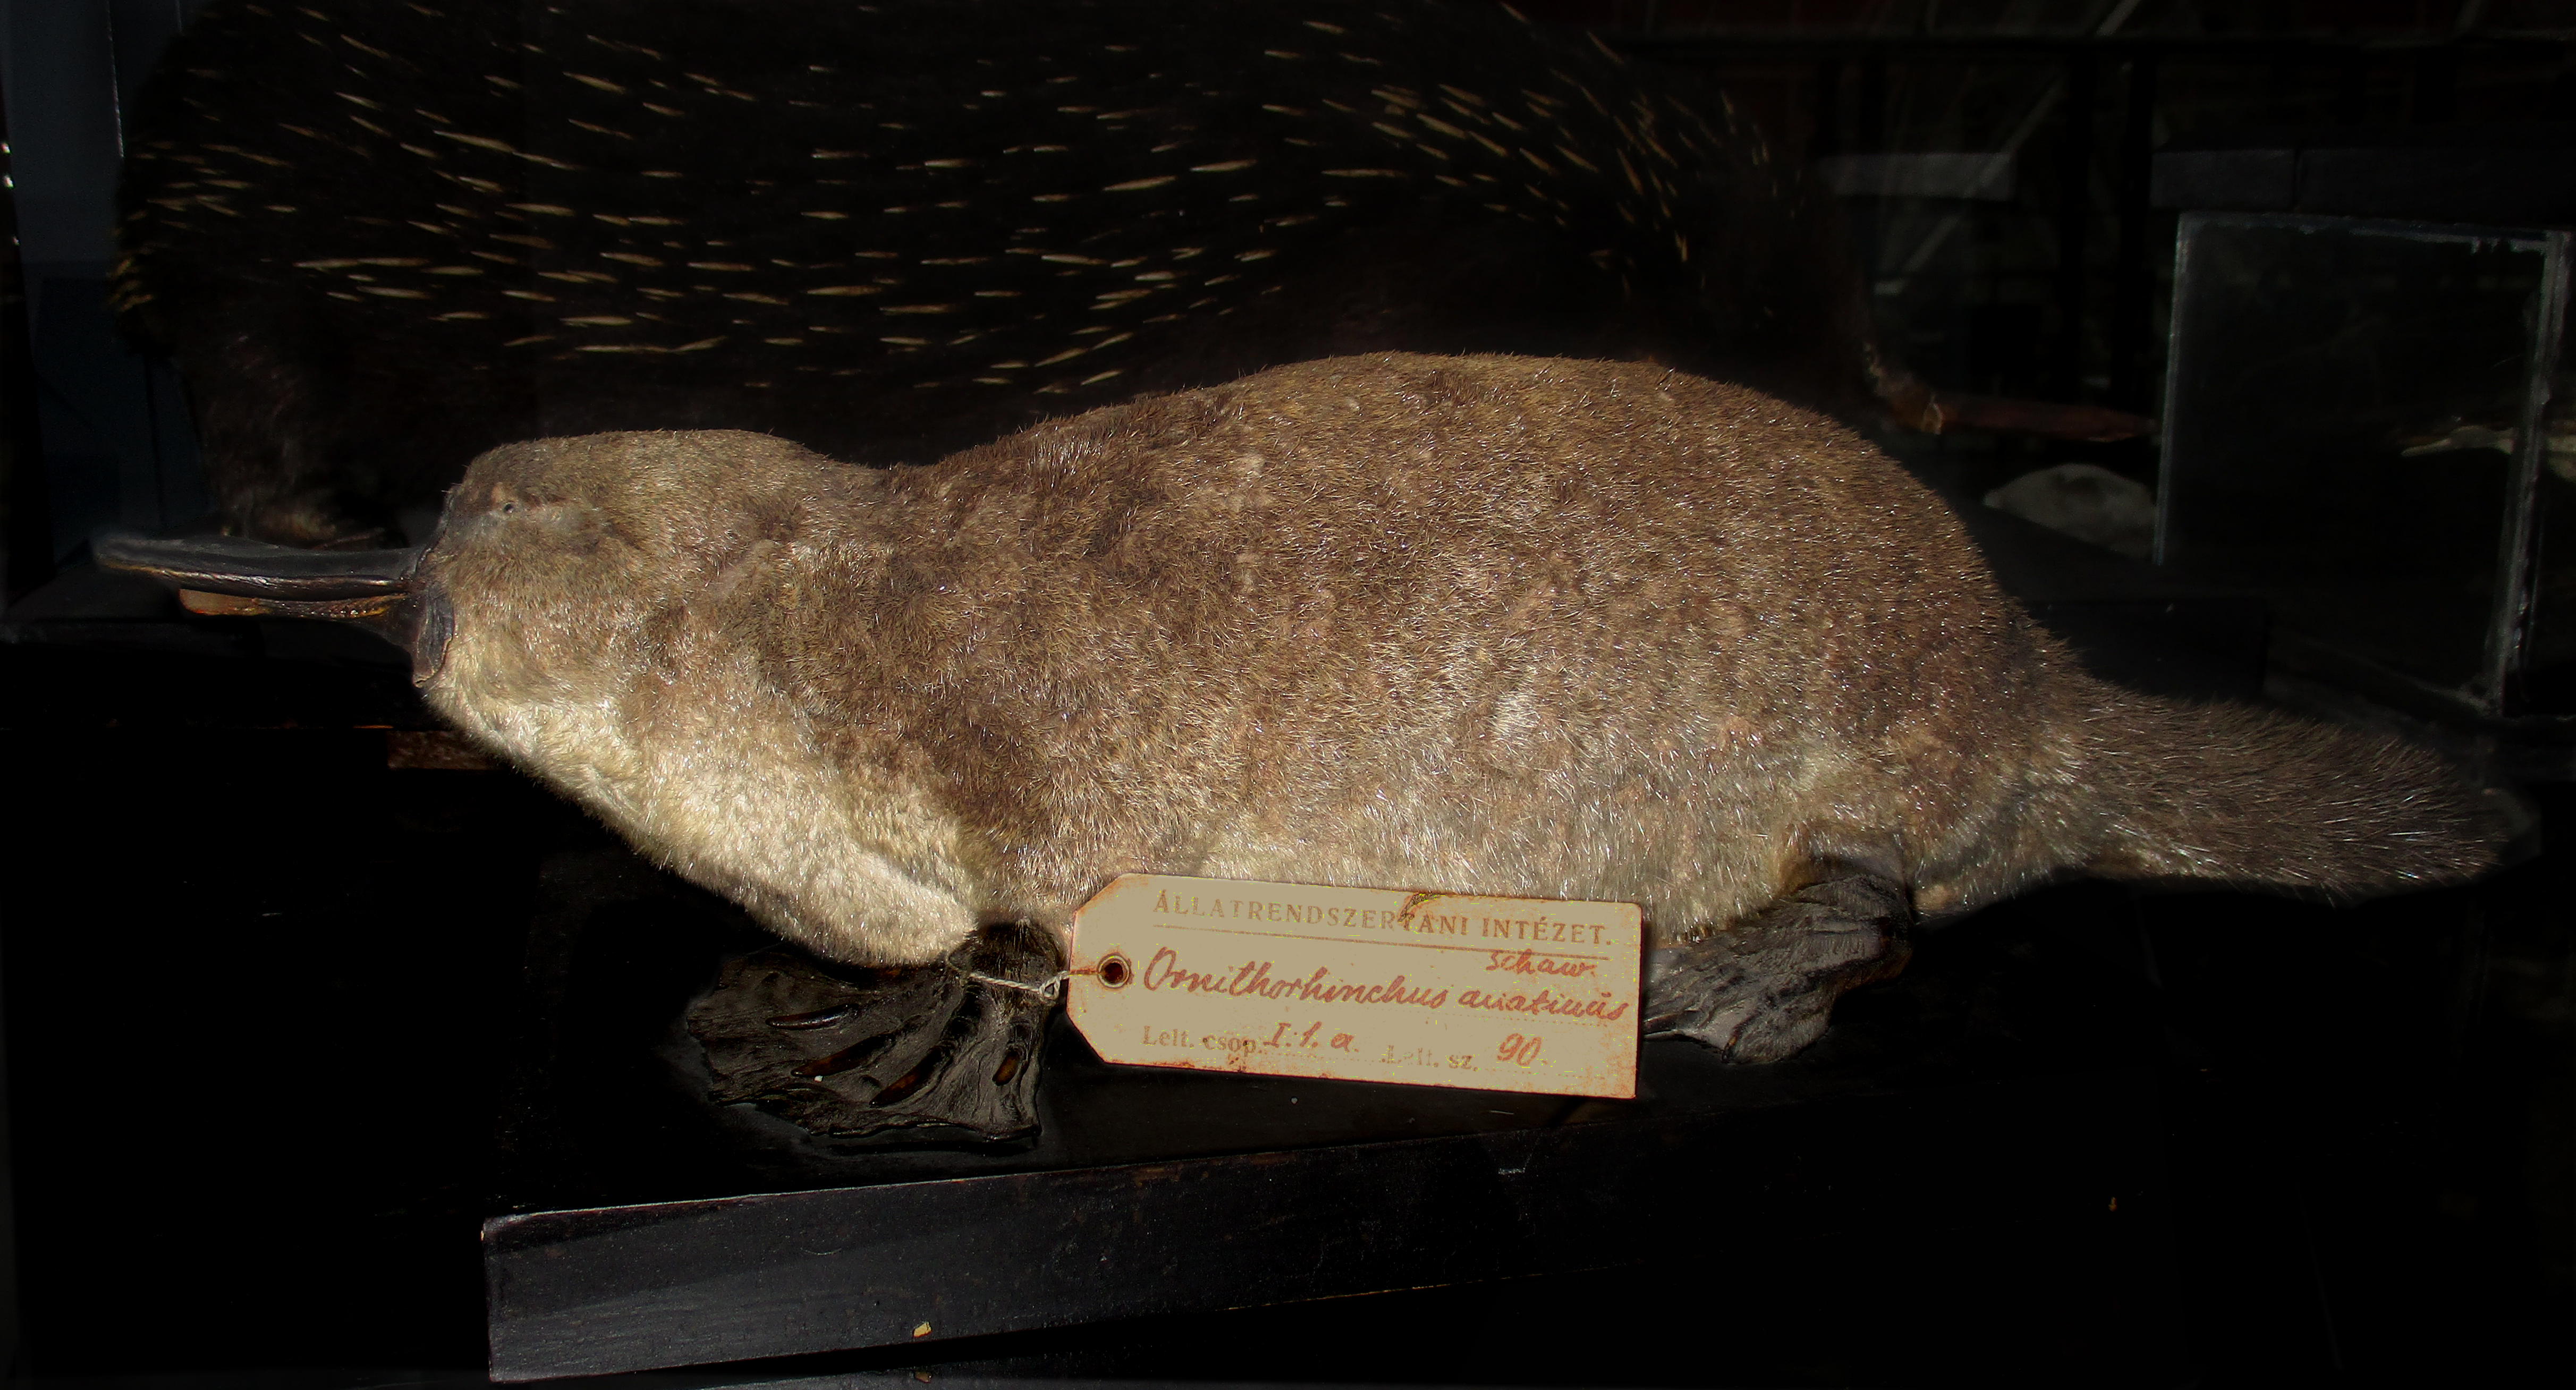 Specimen of Platypus in the Exhibition of the ELTE Natural History Museum